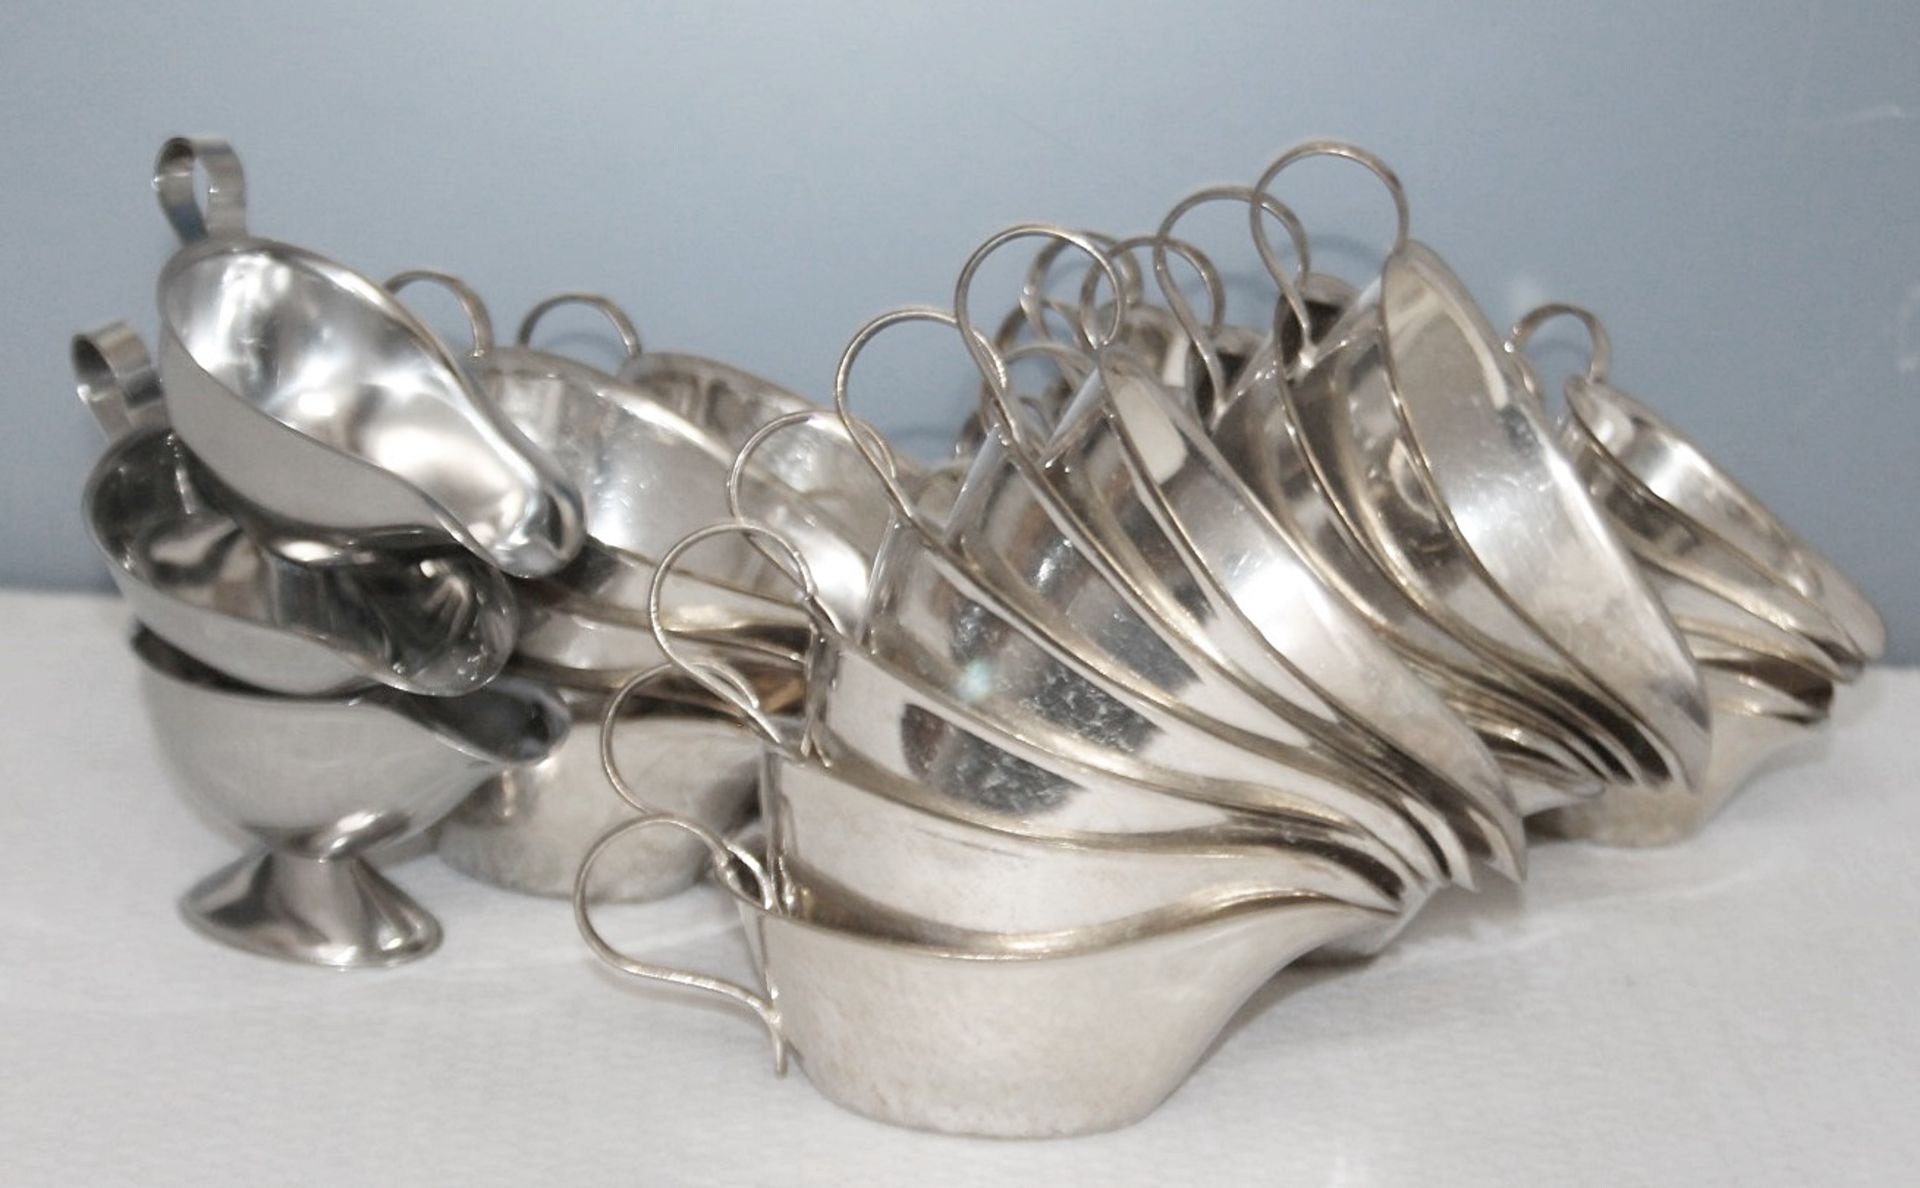 30 x Assorted Silver-Plated Sauce Boats - The Majority Strong and Woodhatch Branded - Recently - Image 7 of 8